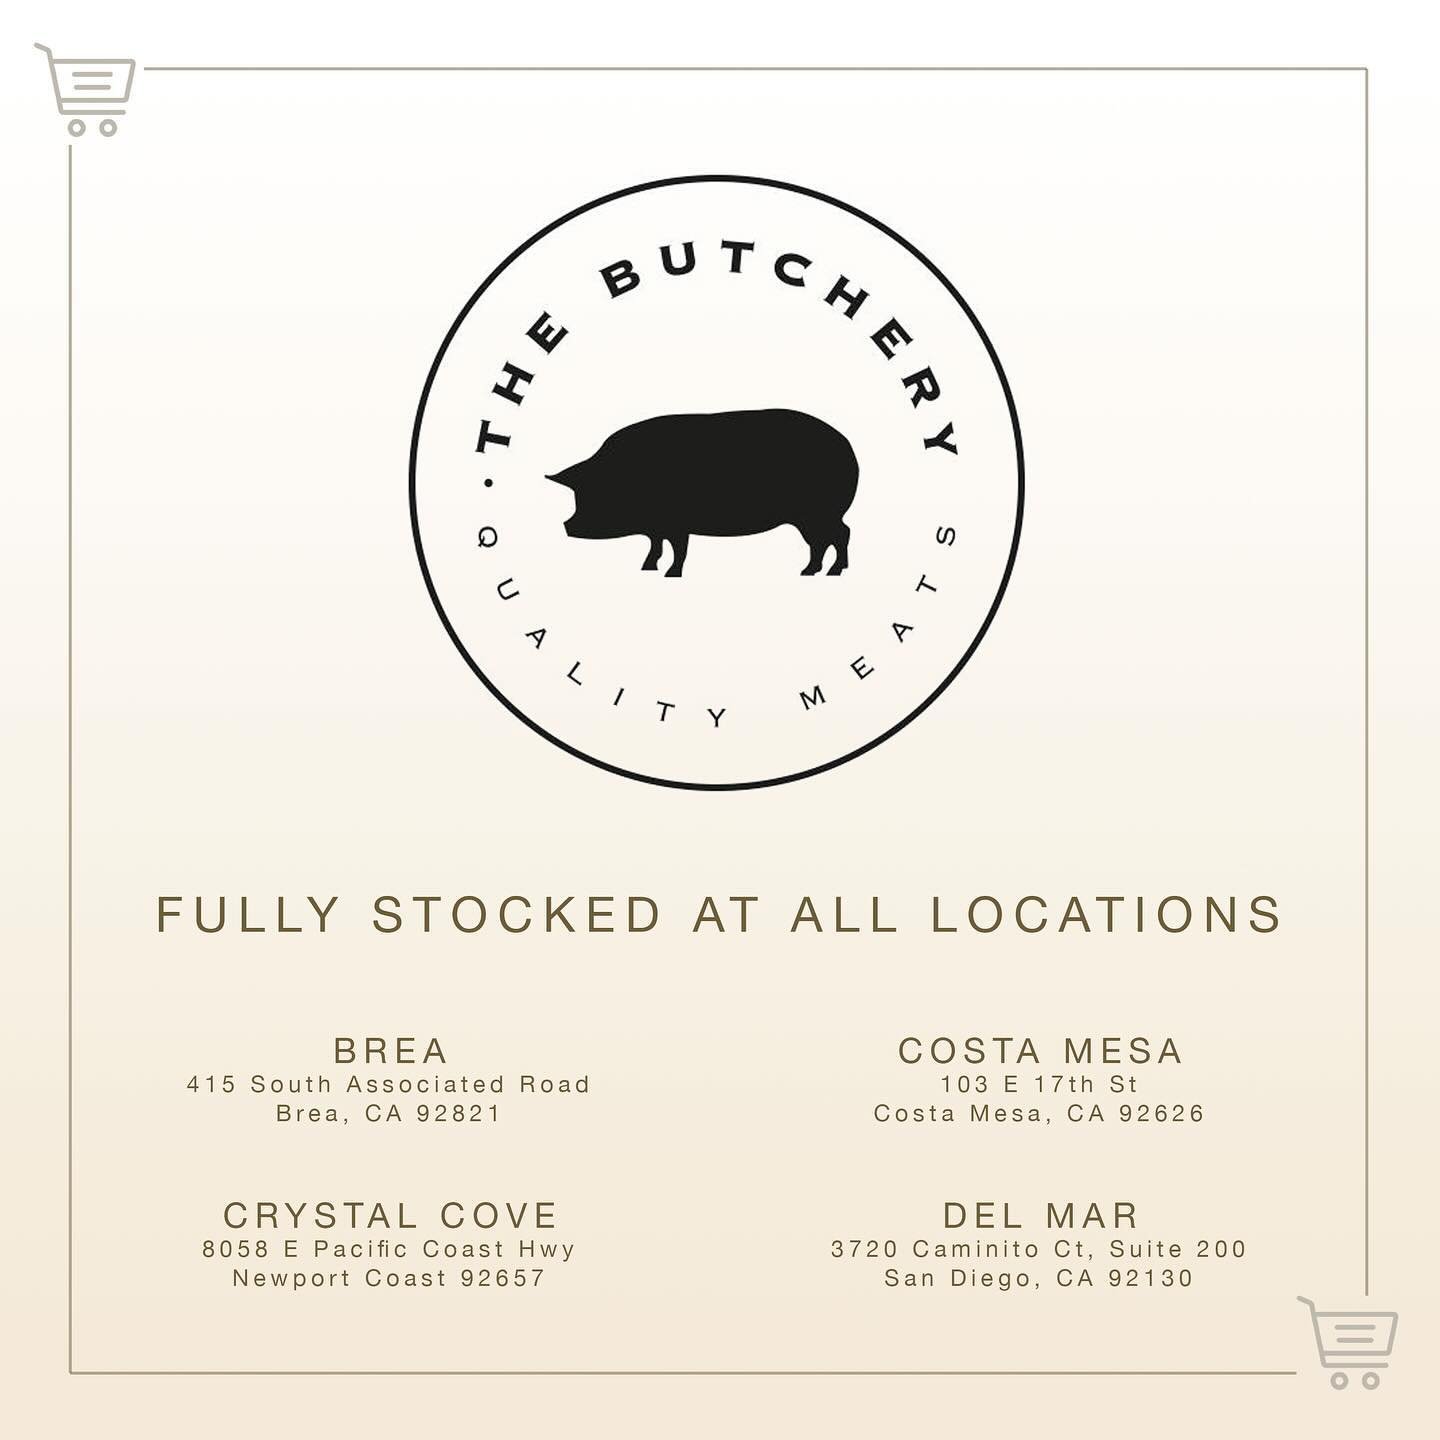 Friends of Southern California!

We have all four locations of The Butchery stocked up with our products.  If you&rsquo;re located near one of the locations listed below, please give them a visit and check out their selection of high-quality meats, a